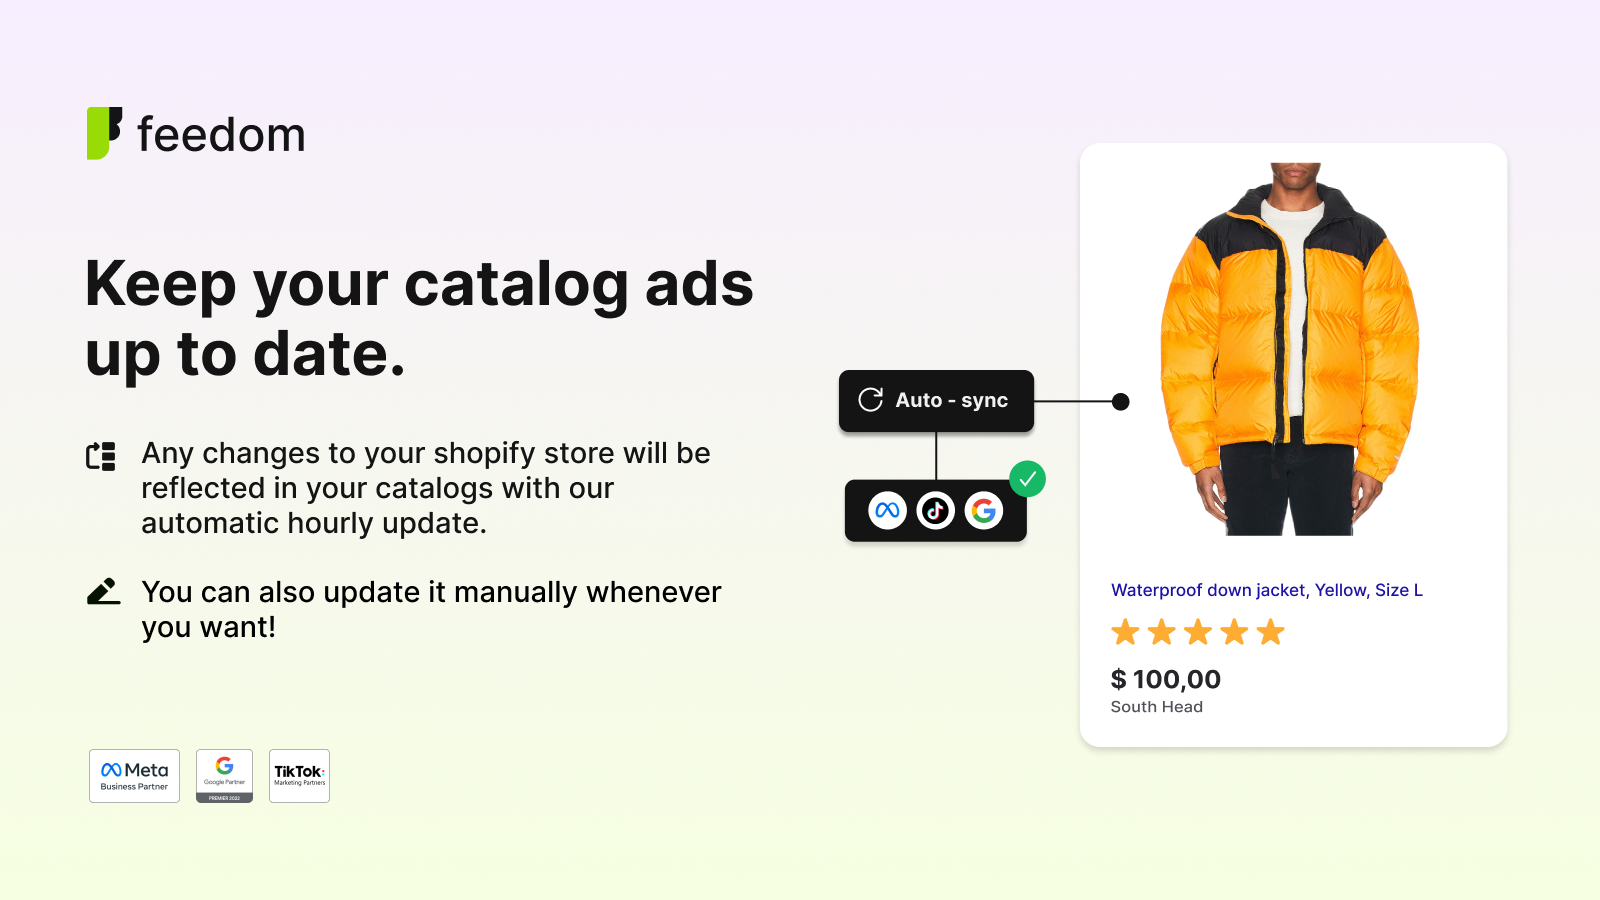 Keep your catalog ads up to date